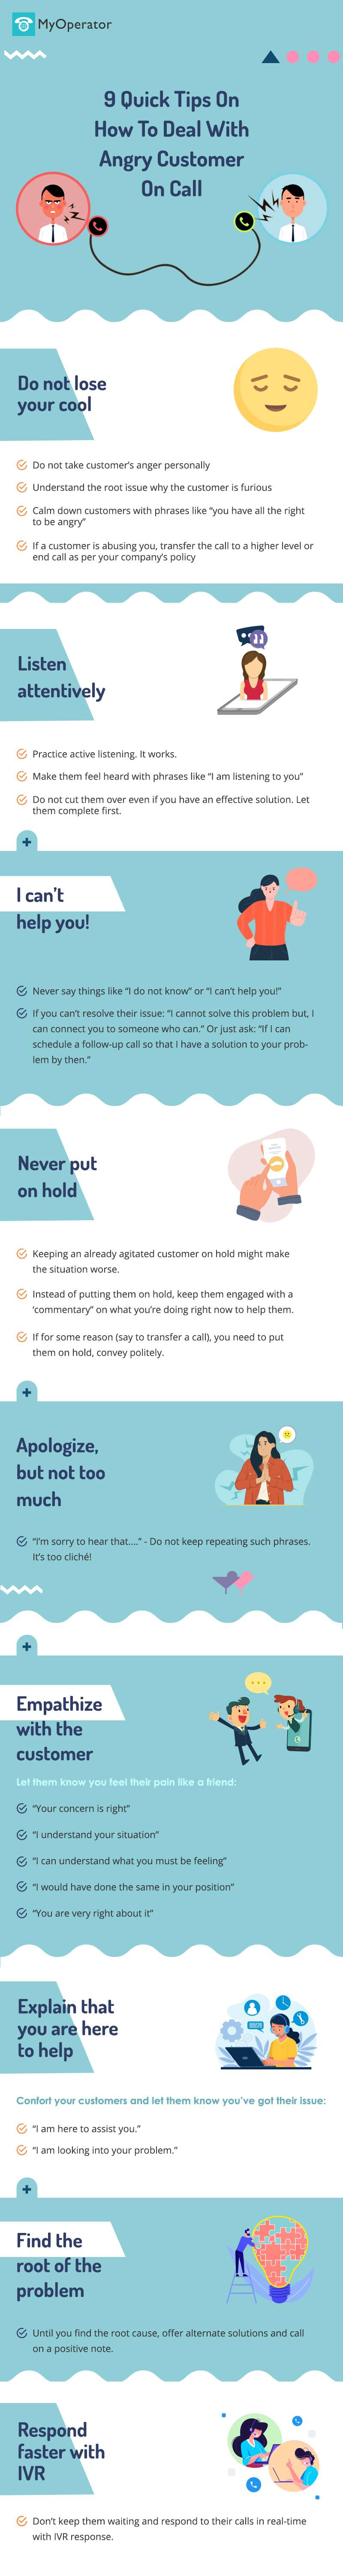 9 Quick Tips On How To Deal With Angry Customers On Call [Infographic]